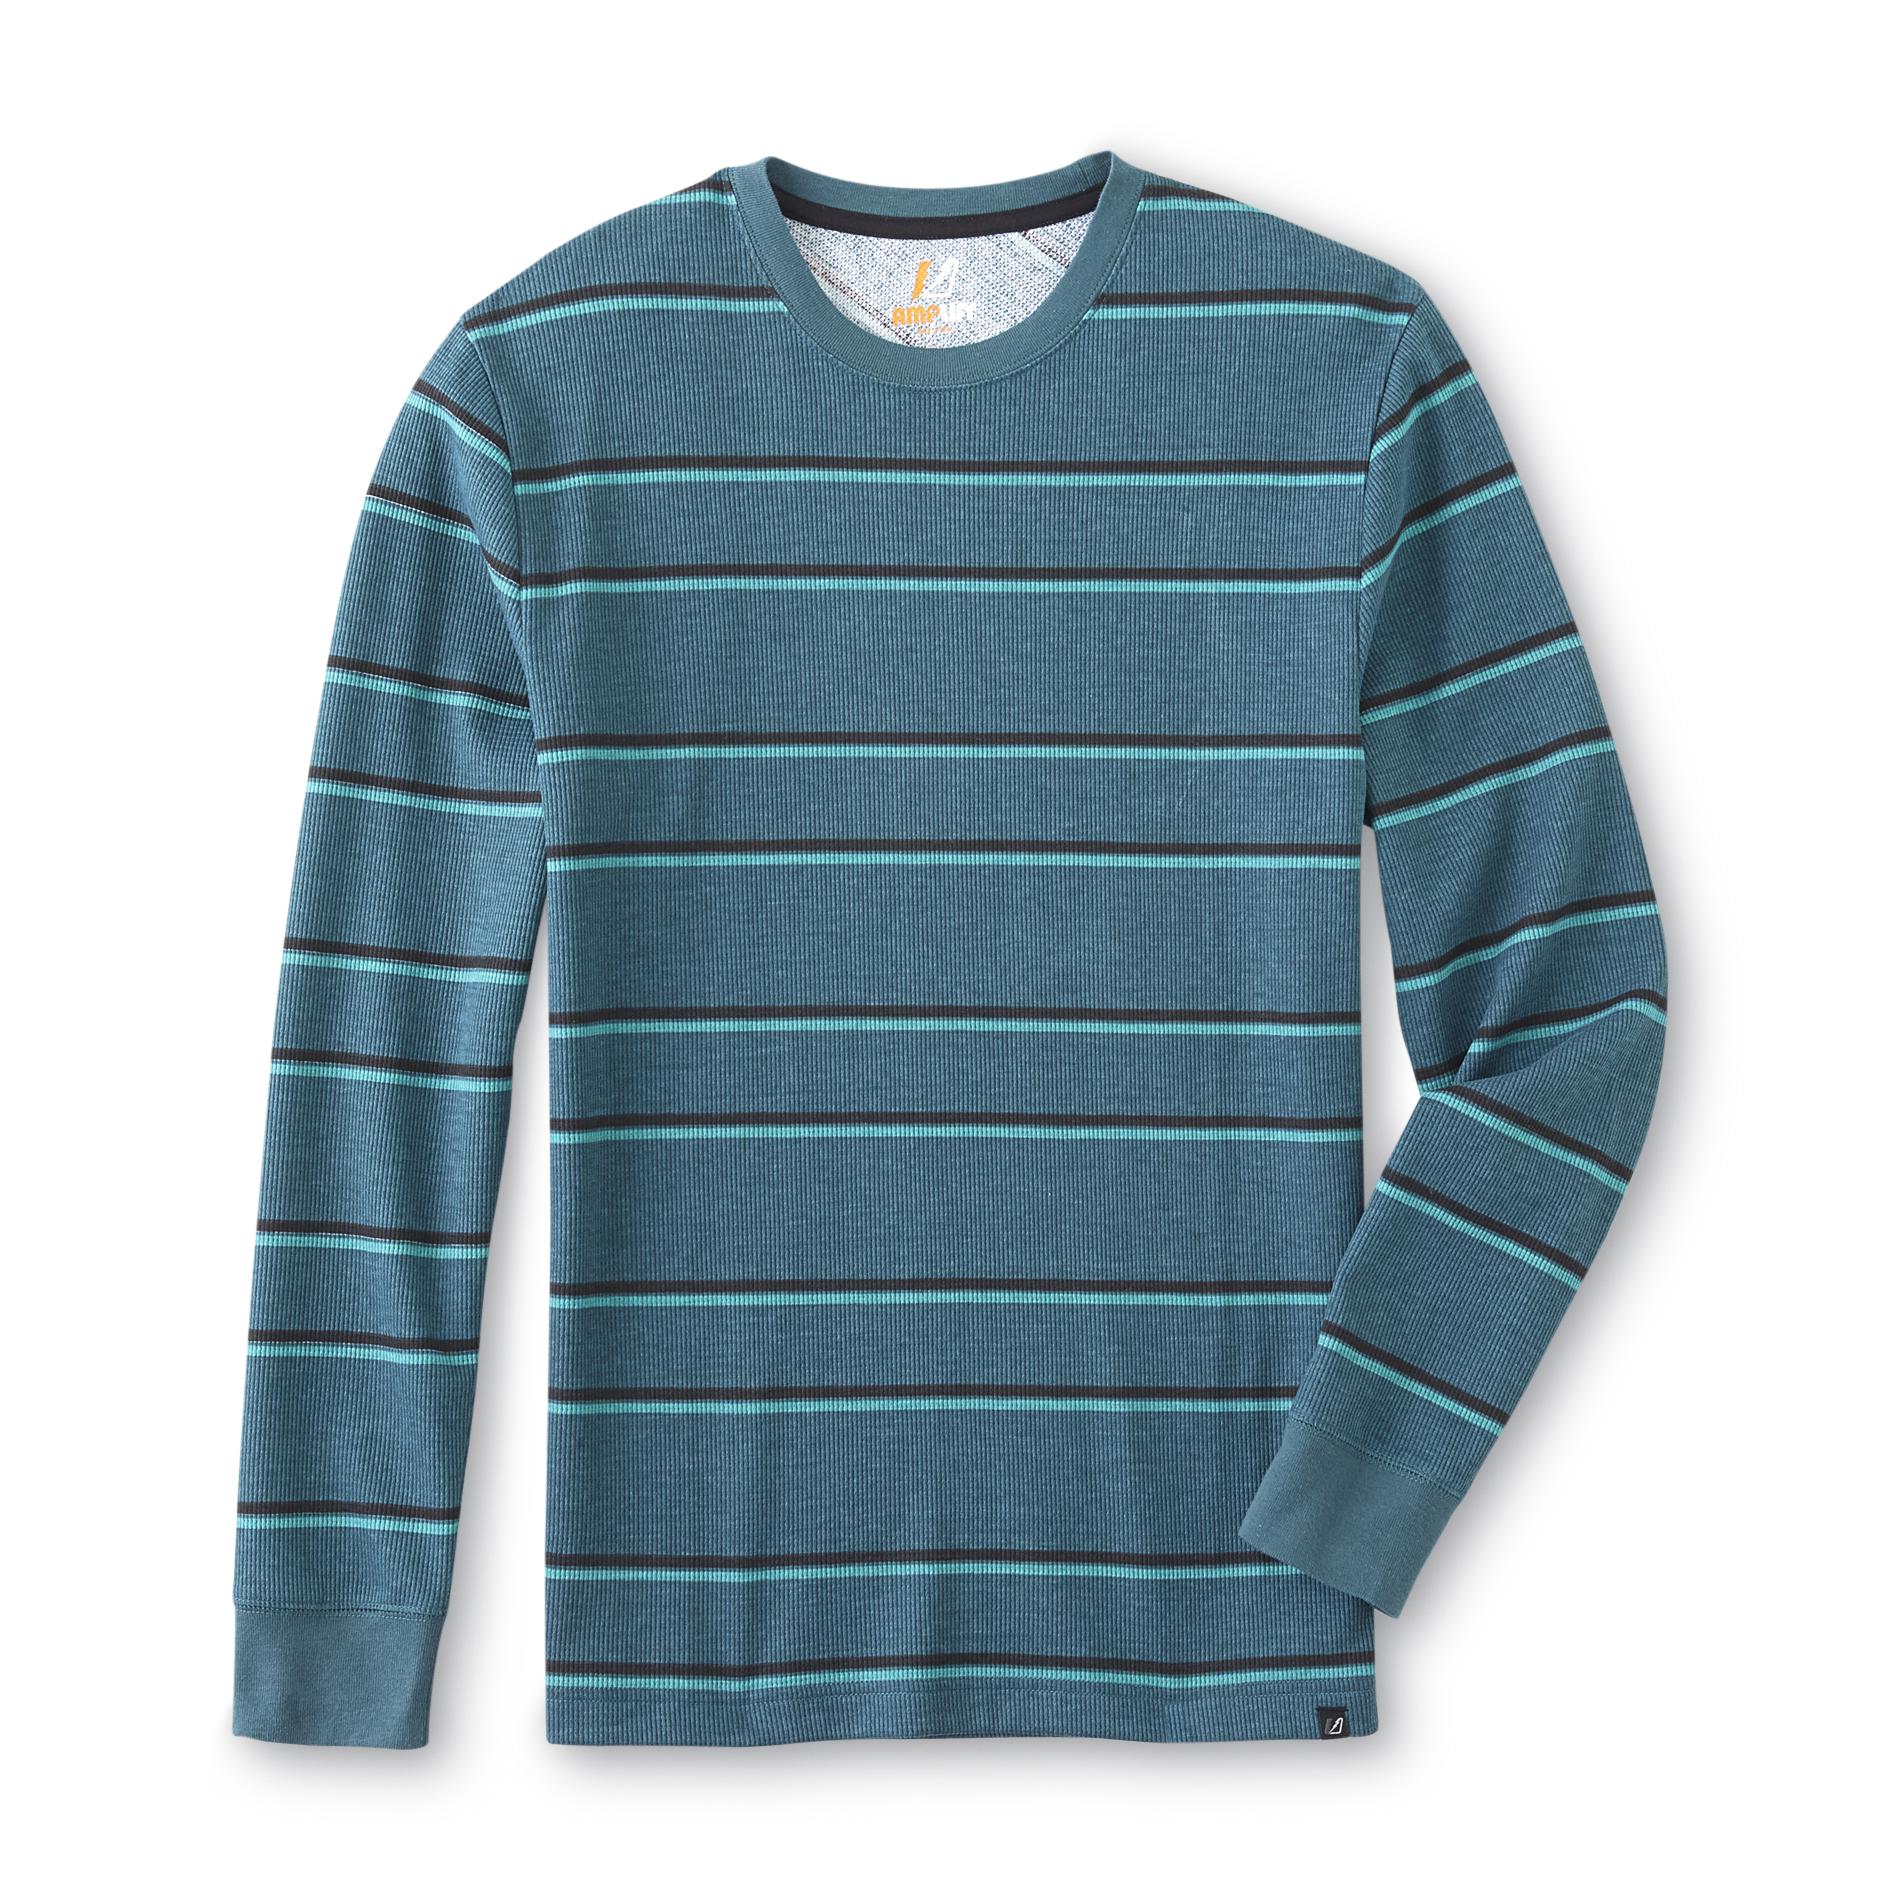 Amplify Young Men's Thermal Shirt - Striped